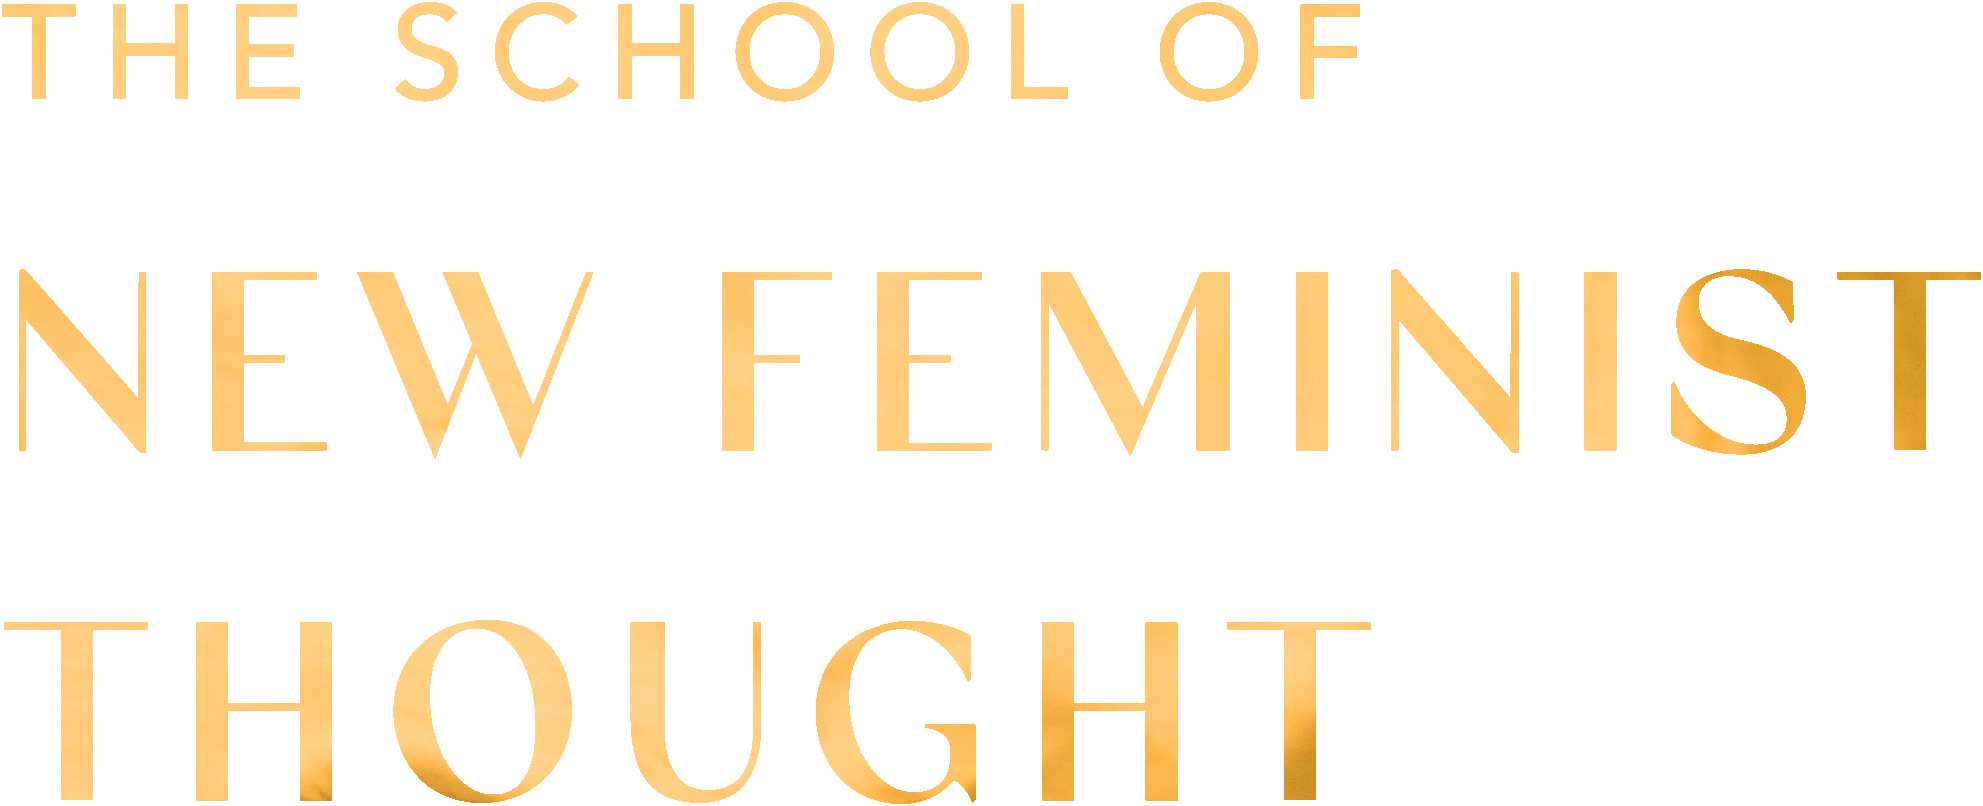 The School of New Feminist Thought